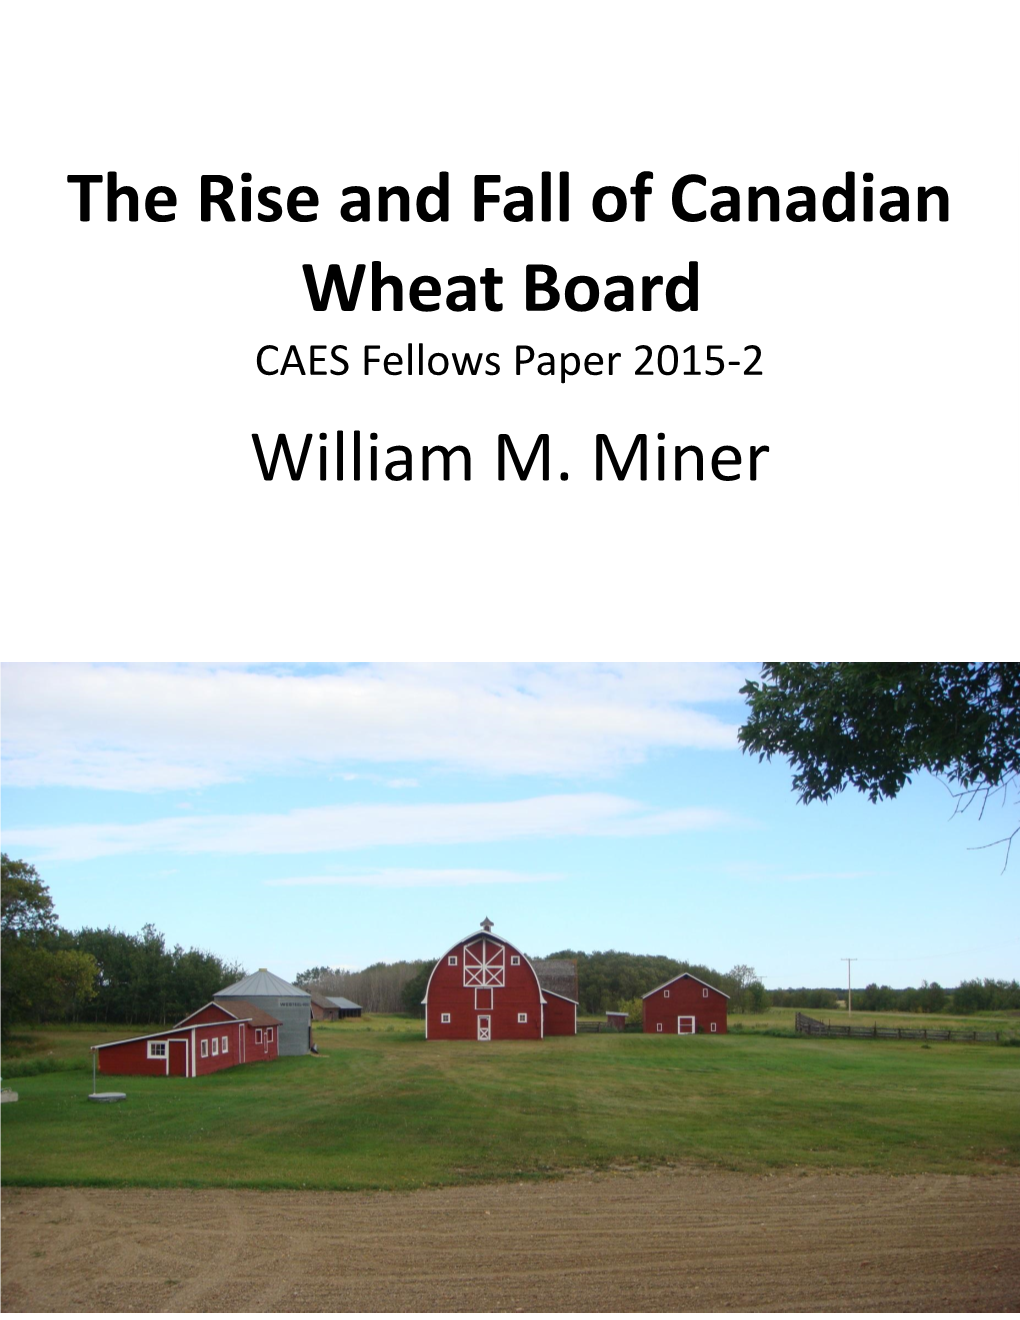 The Rise and Fall of the Canadian Wheat Board. Bill Miner